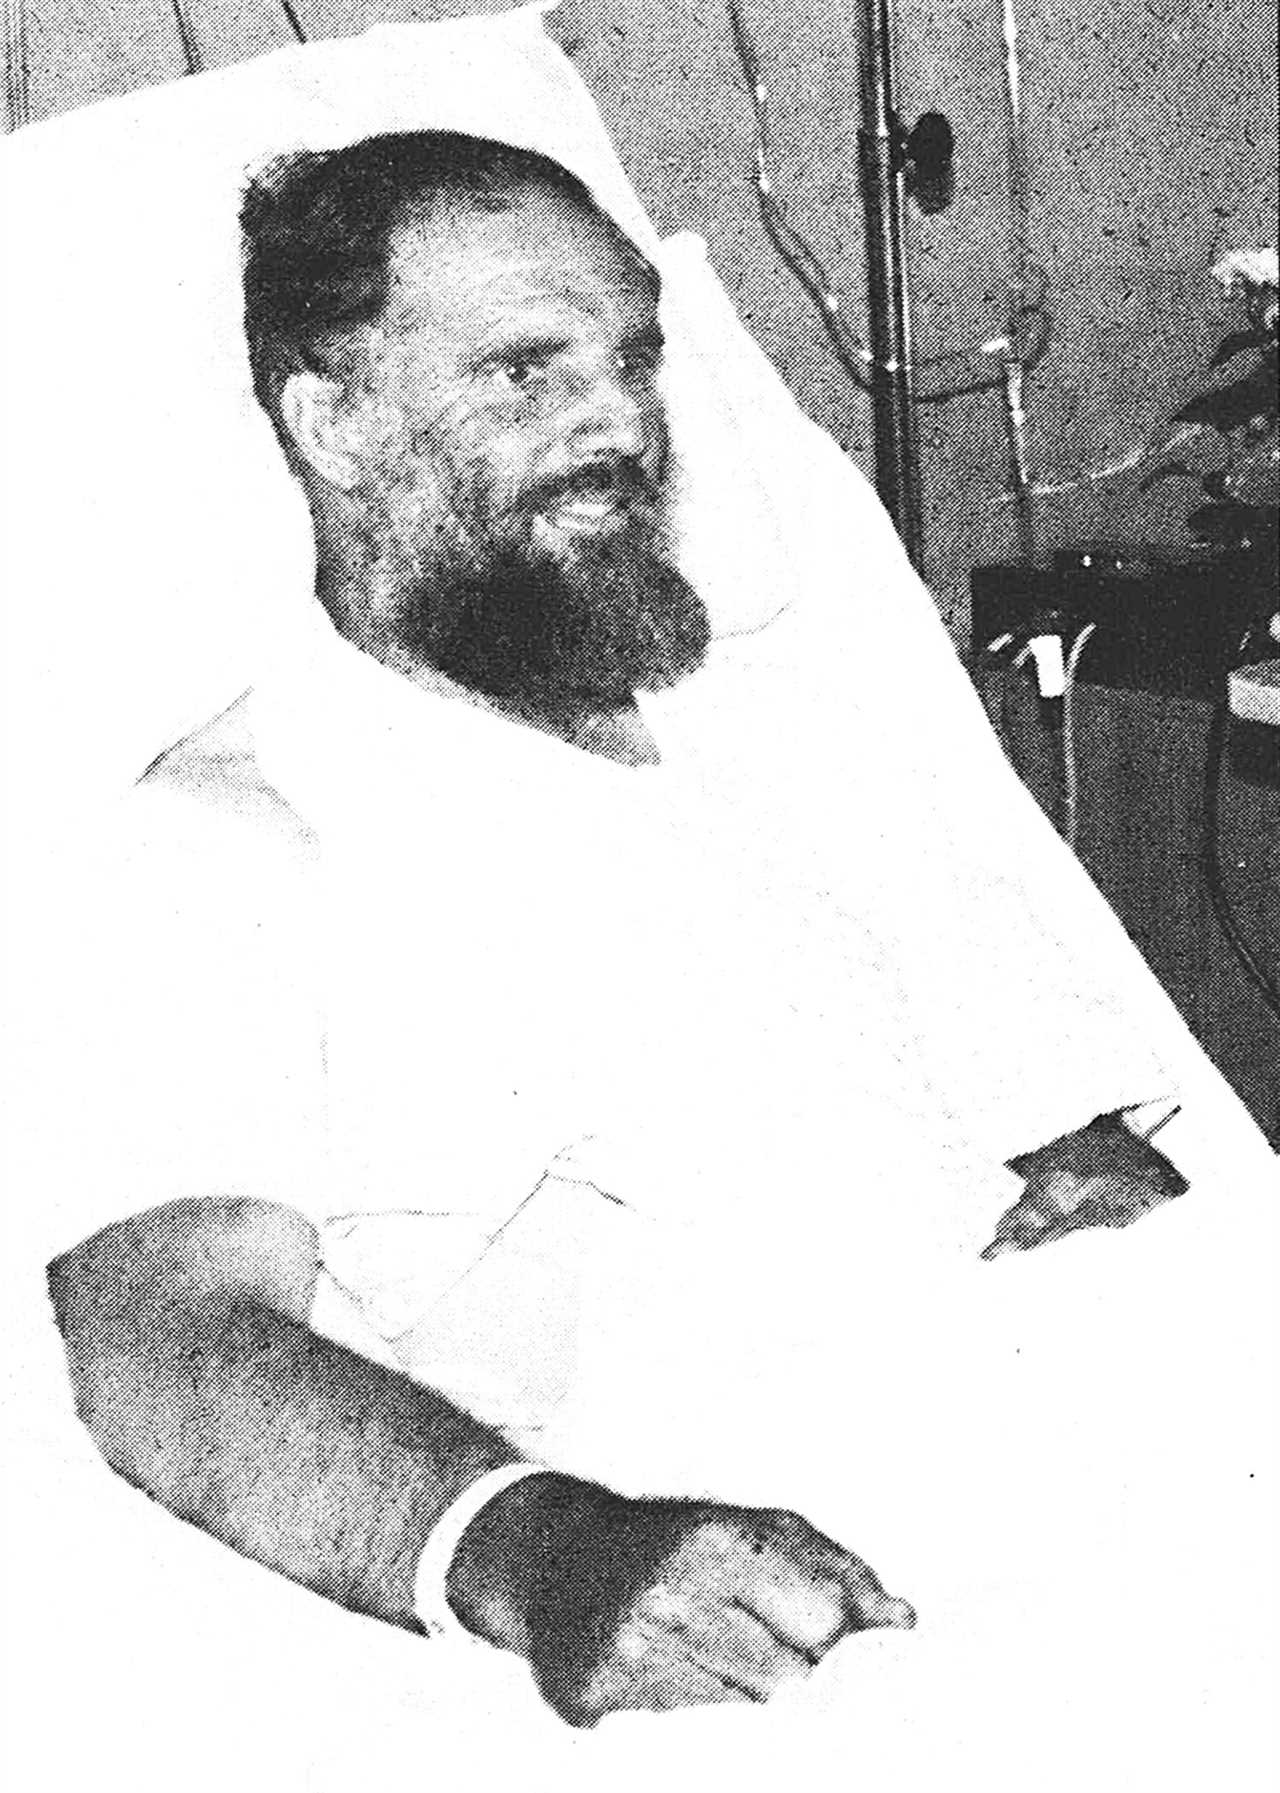 black-and-white image of man in hospital bed